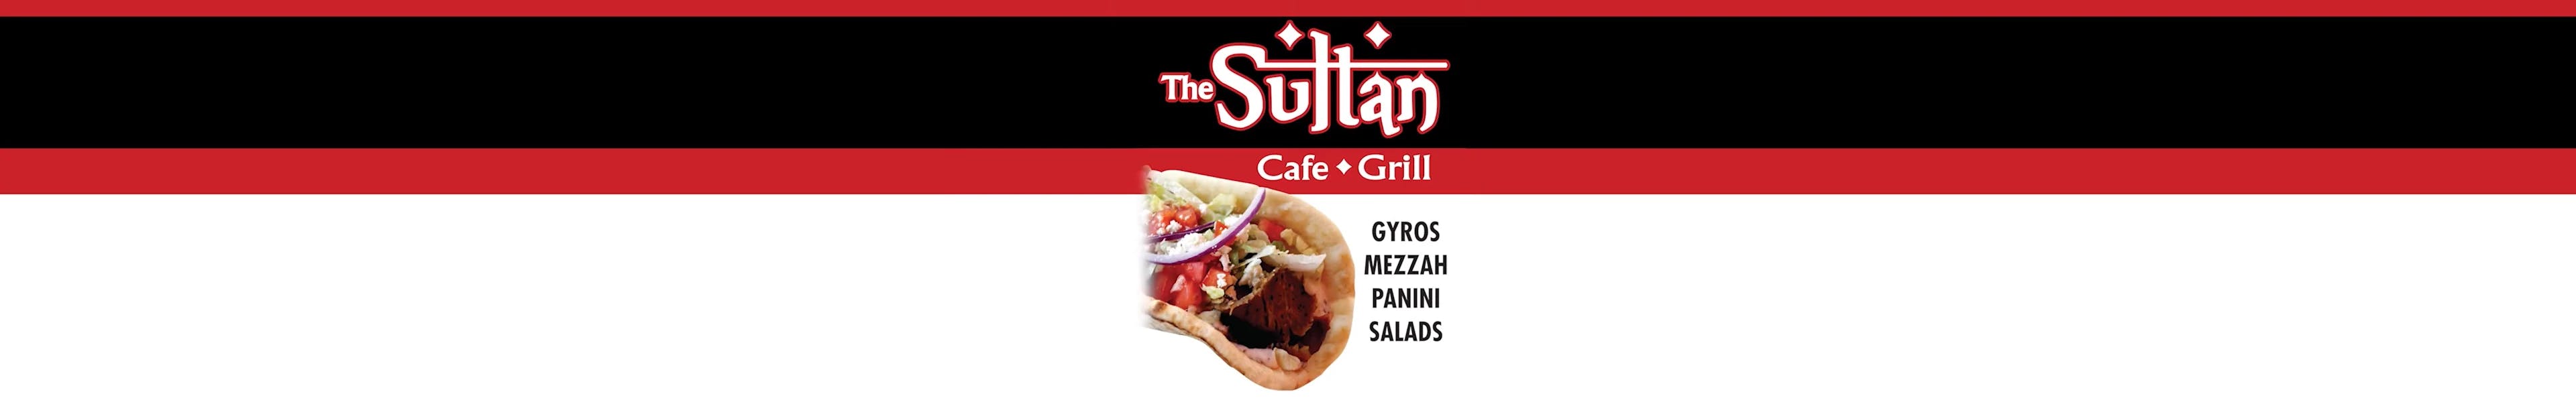 The Sultan Cafe YouTube Video